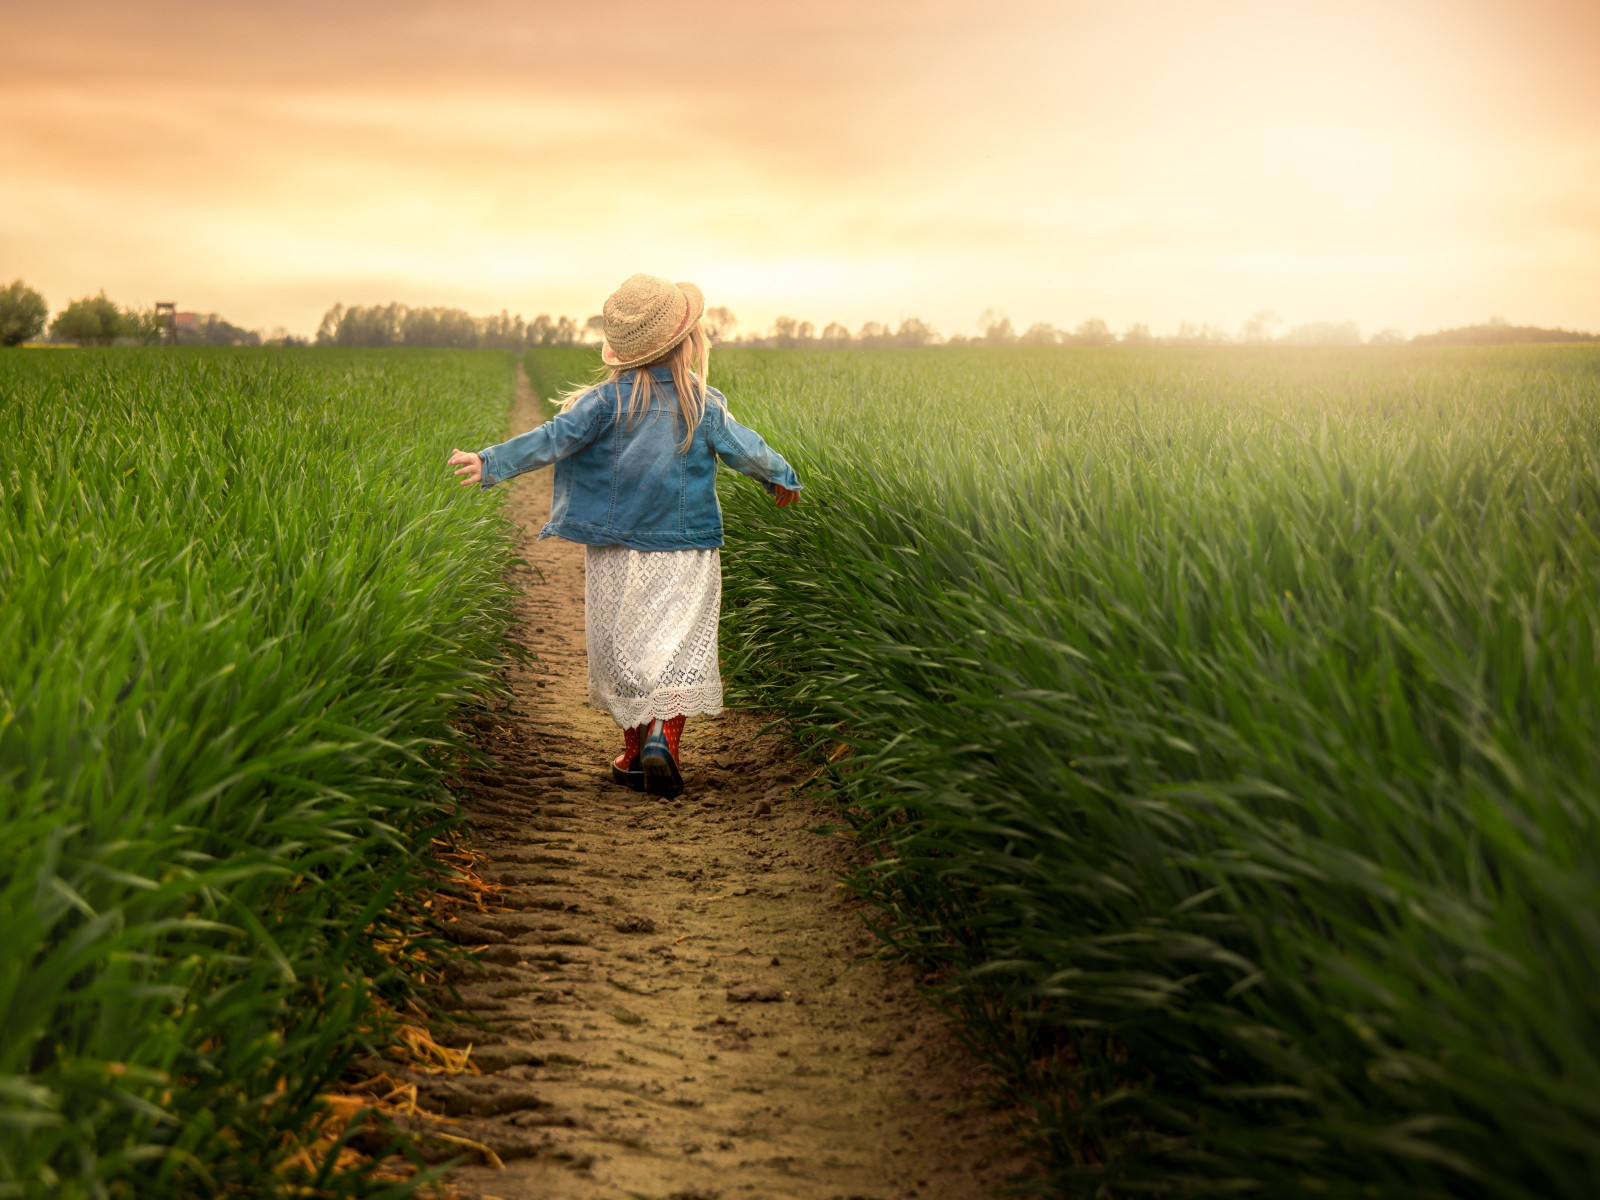 Child in the green field at sunset wallpaper 1600x1200